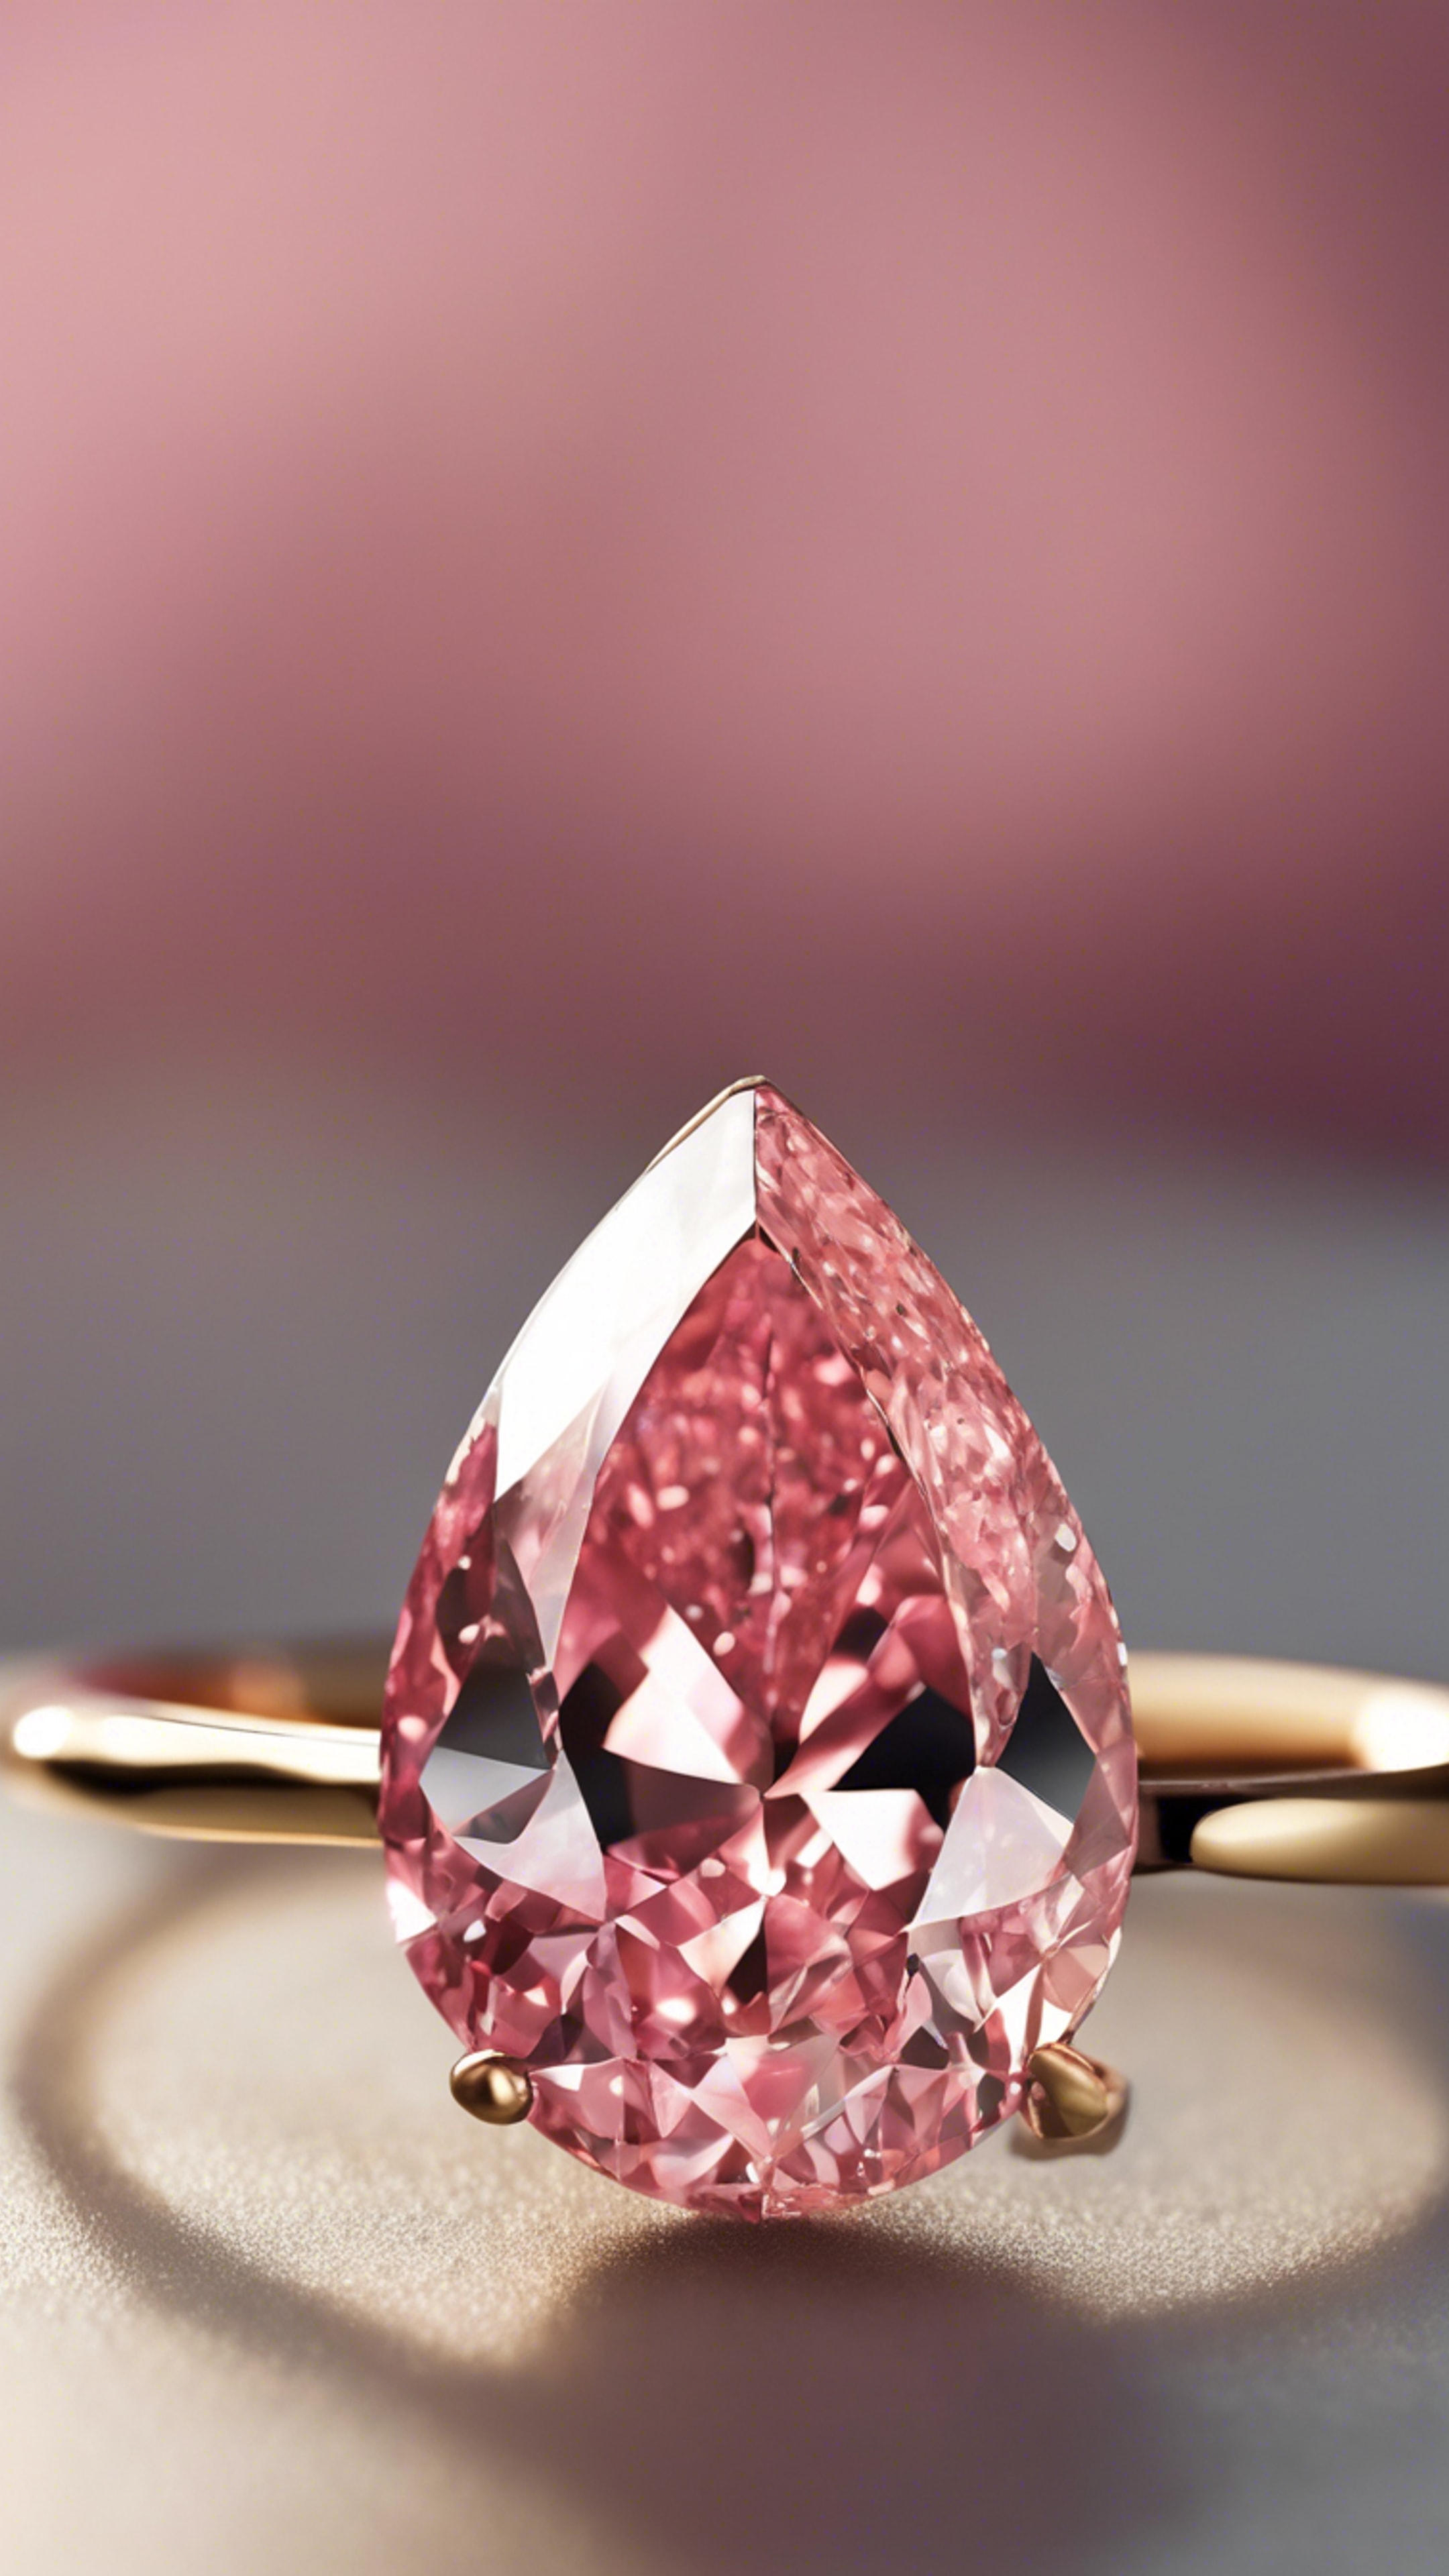 A close-up of a pink pear-shaped diamond on a simple gold band. Wallpaper[930f75676b4b4a58983f]